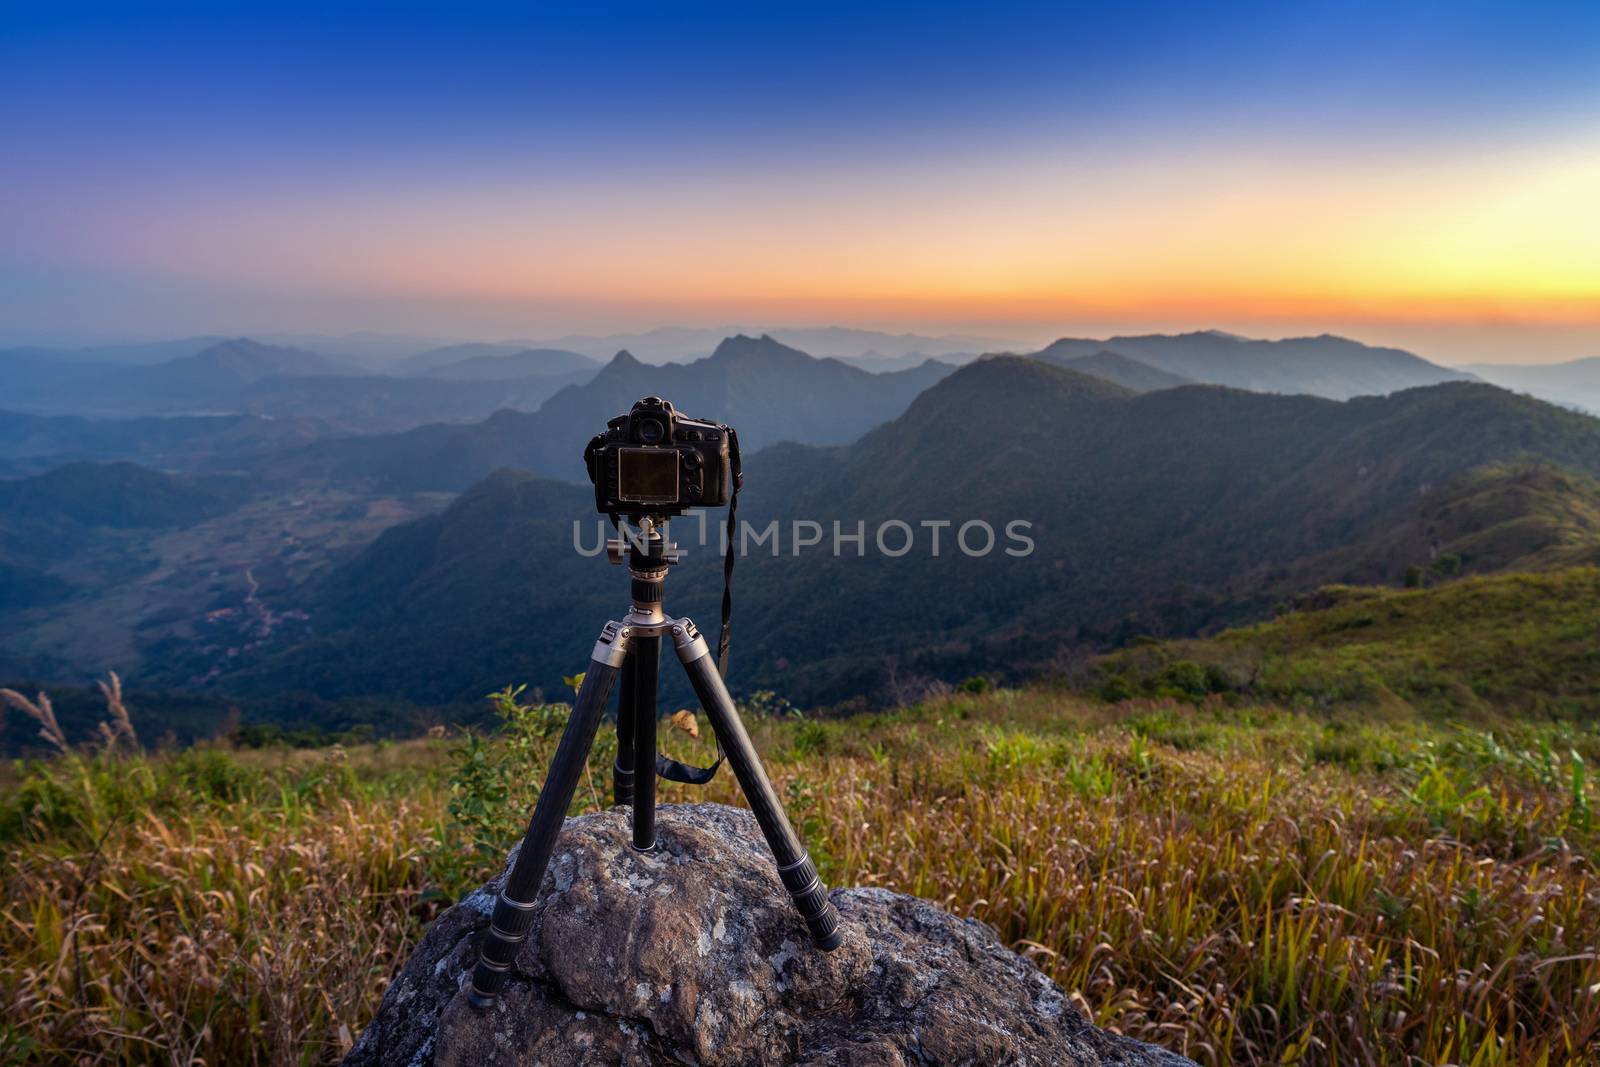 Digital camera on tripod in the mountains.